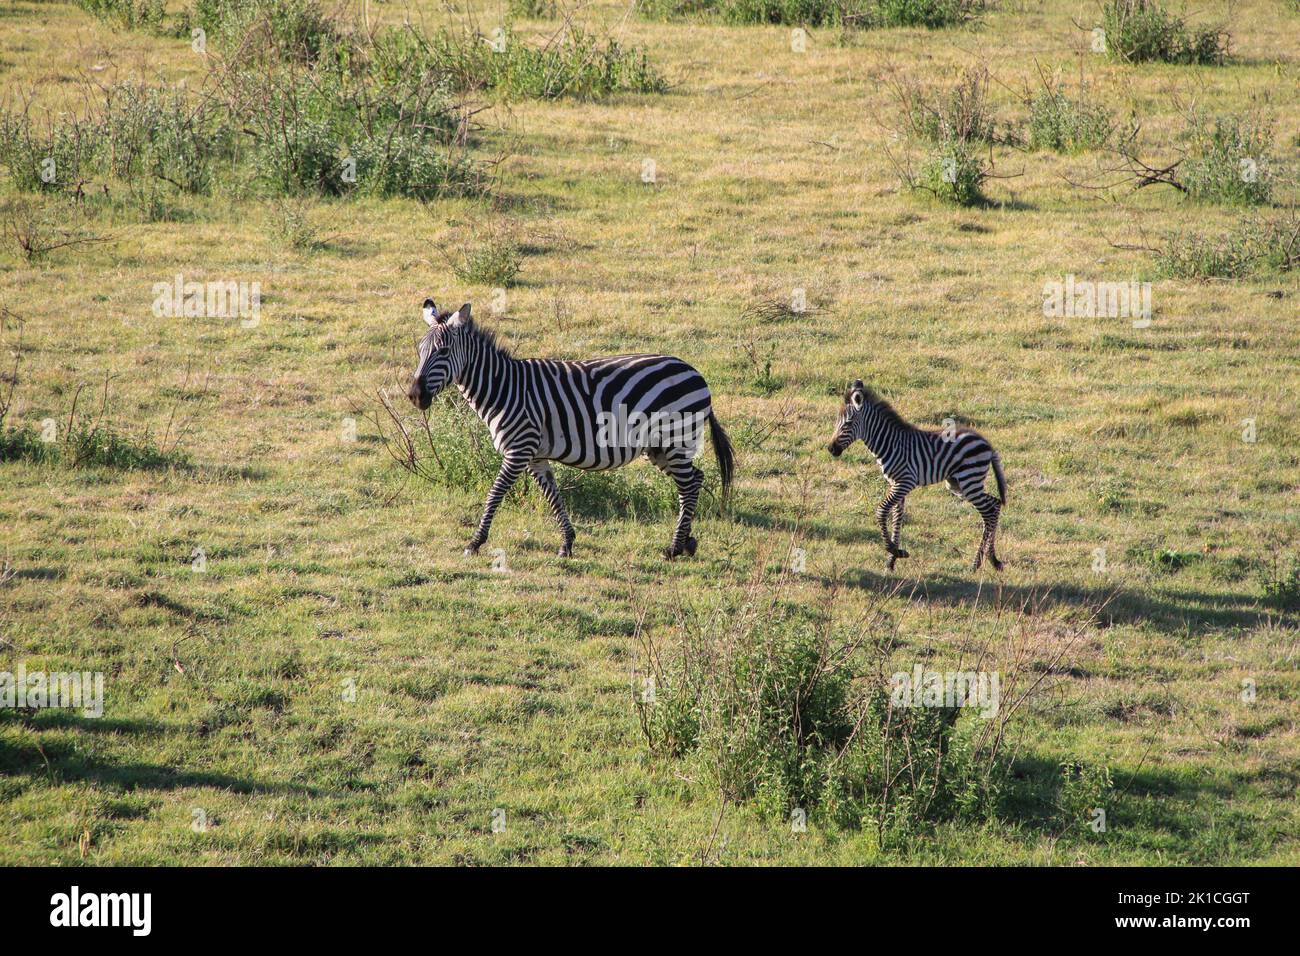 Zebra with cub on an off-road vehicle safari in Tanzania within the Ngorongoro crater, UNESCO world heritage. Stock Photo